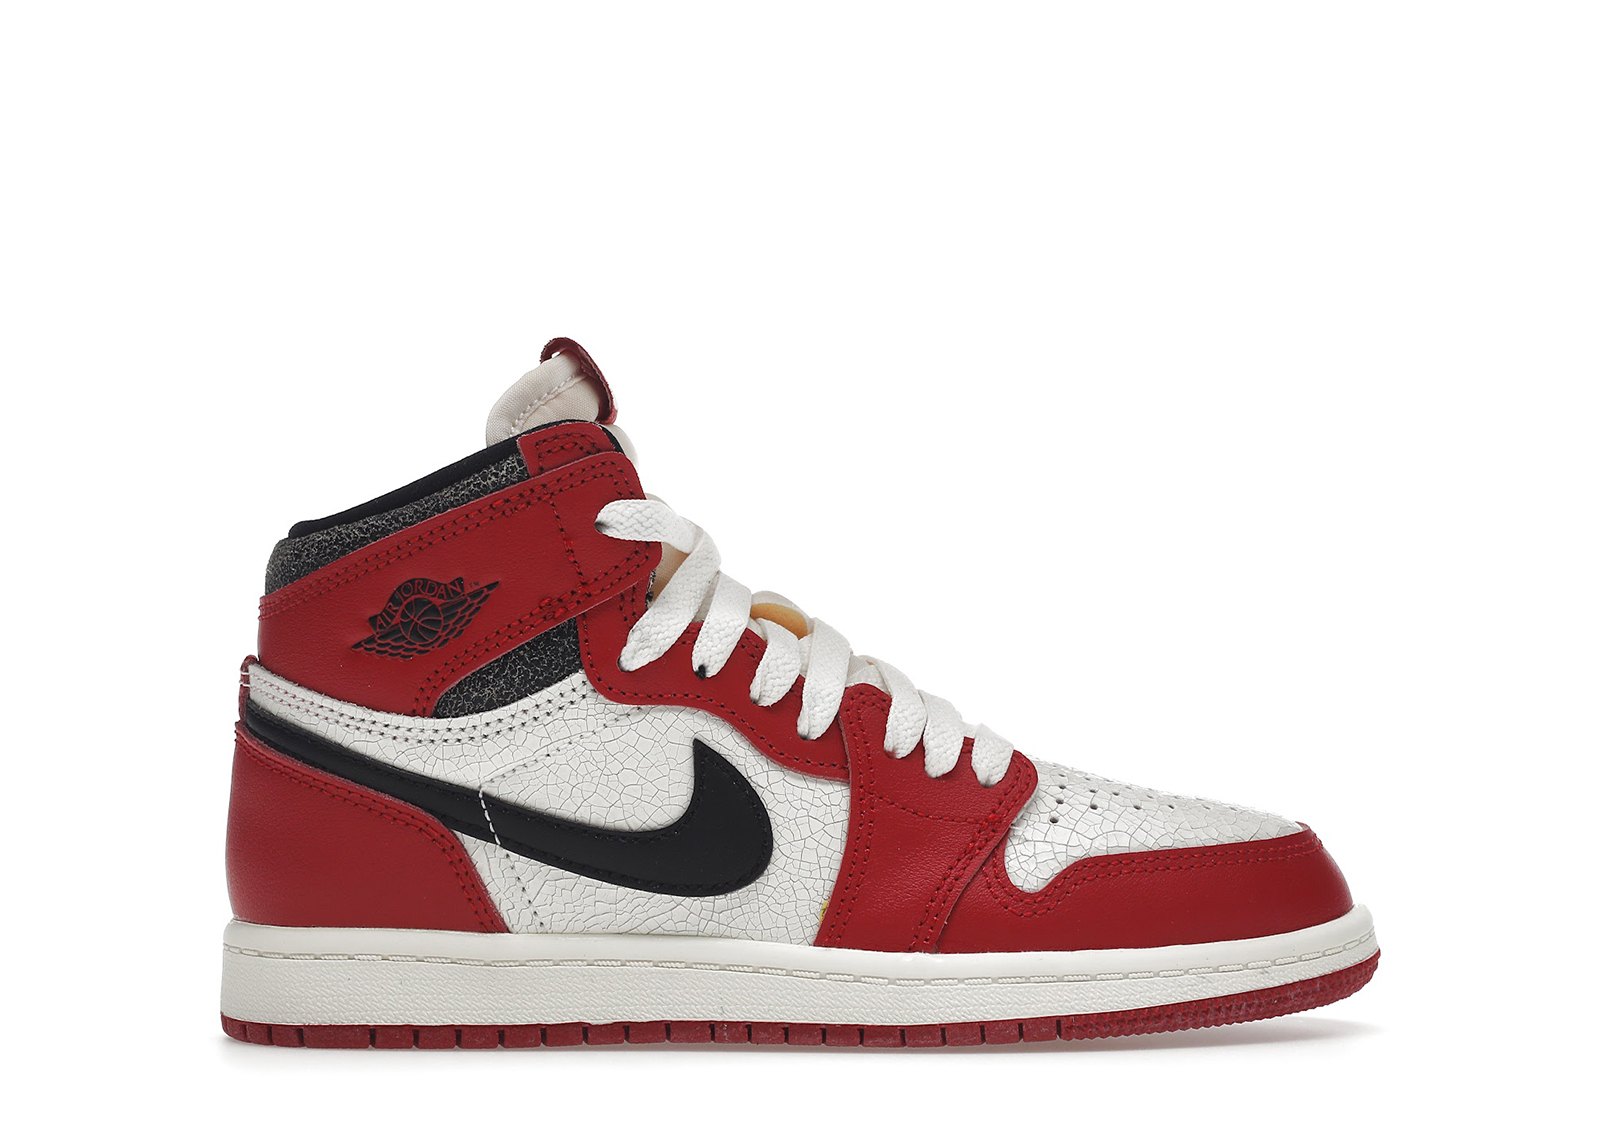 Jordan 1 Retro High OG Chicago Lost and Found (PS) - FD1412-612 - US